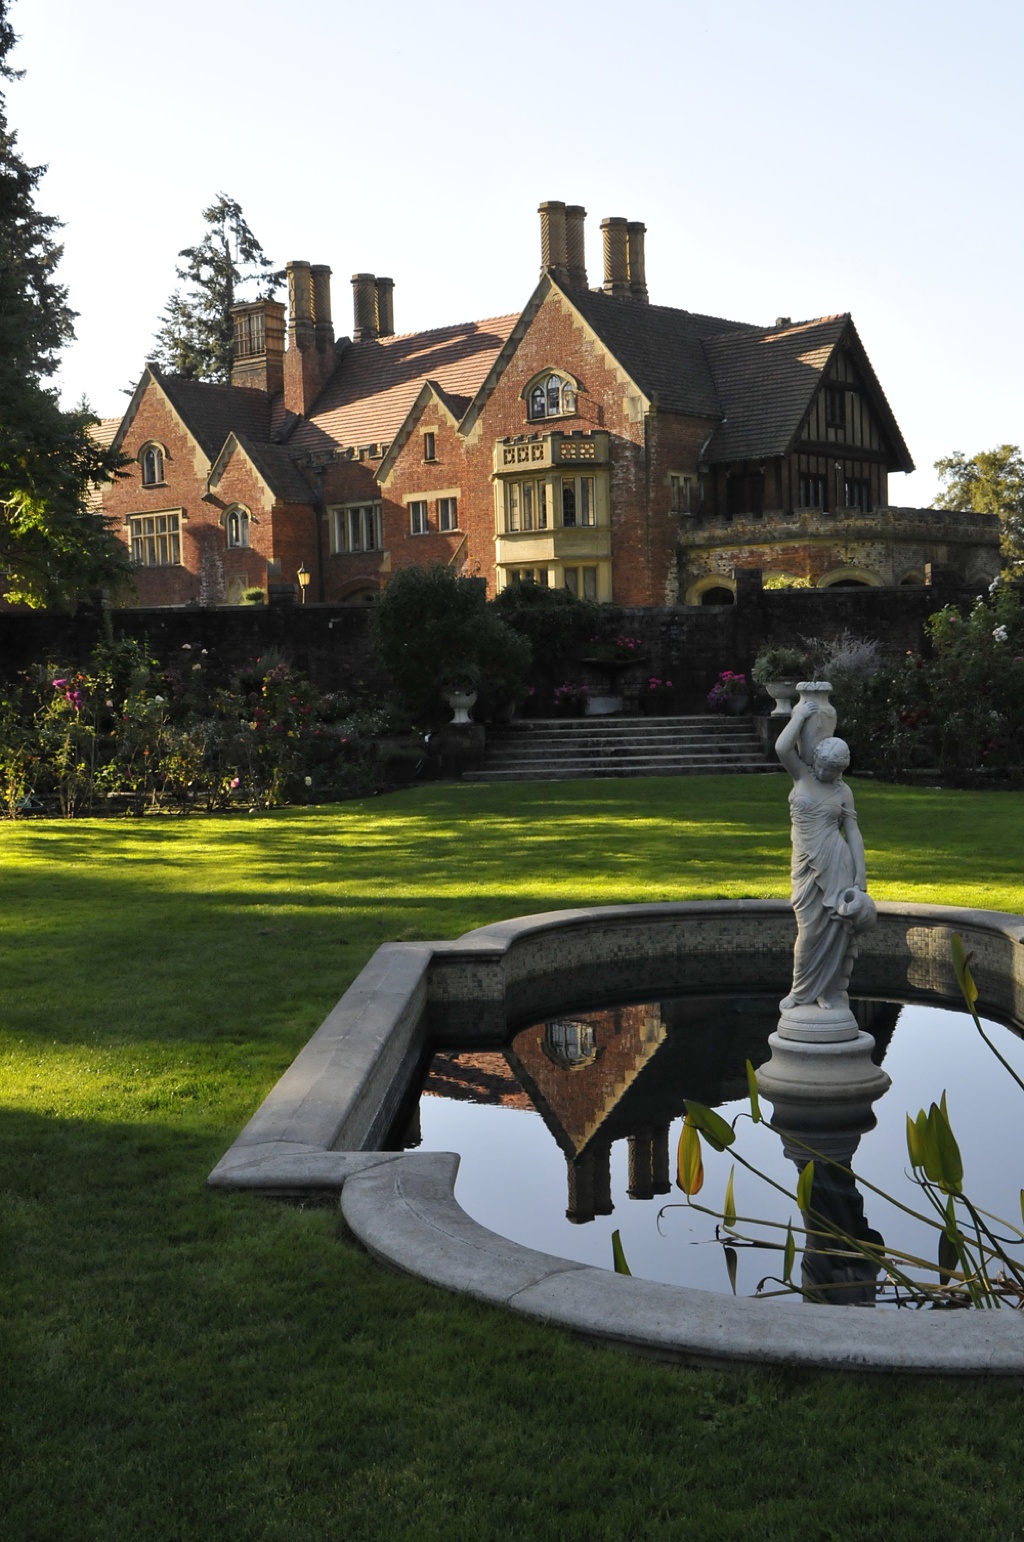 An image of Thornewood Castle from the outdoor fountain